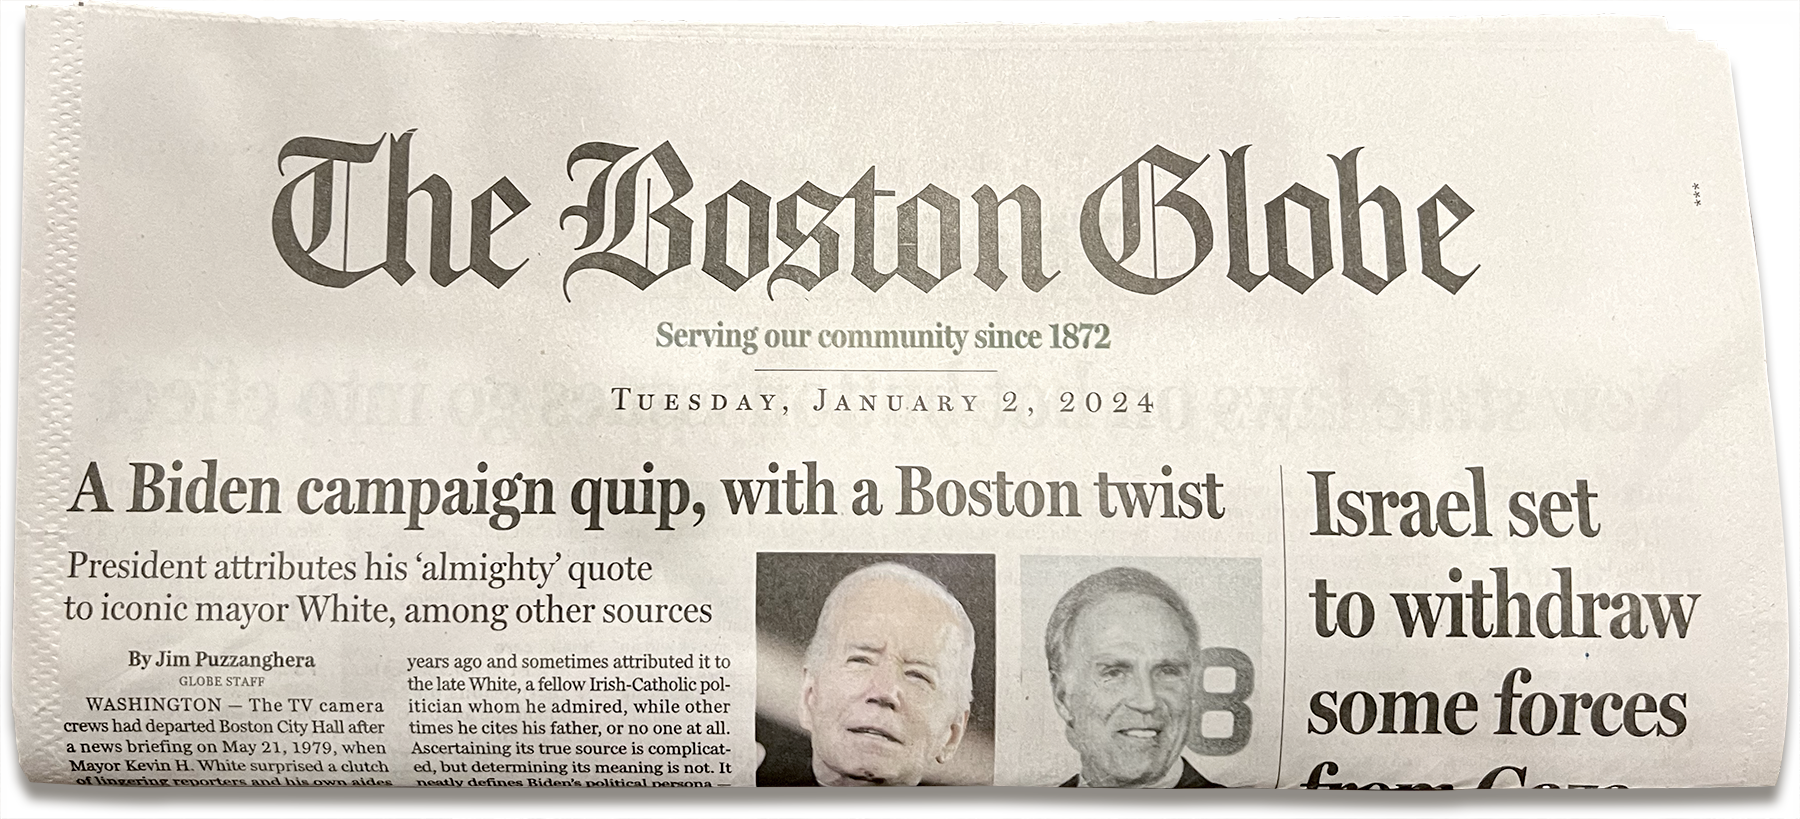 The top quarter of the front page of the Boston Globe print newspaper published on Tuesday, January 2nd, 2024. There are two headlines visible. The leftmost headline reads, 'A Biden campaign quip, with a Boston twist'. The right headline reads, 'Israel set to widthdraw some forces'. The leftmost headline takes up three quarters of the width of the nespaper, while the rightmost headline takes up one quarter of its width. Below the leftmost headline are two small photos, one of President Joe Biden and the other of Mayor Kevin H. White.